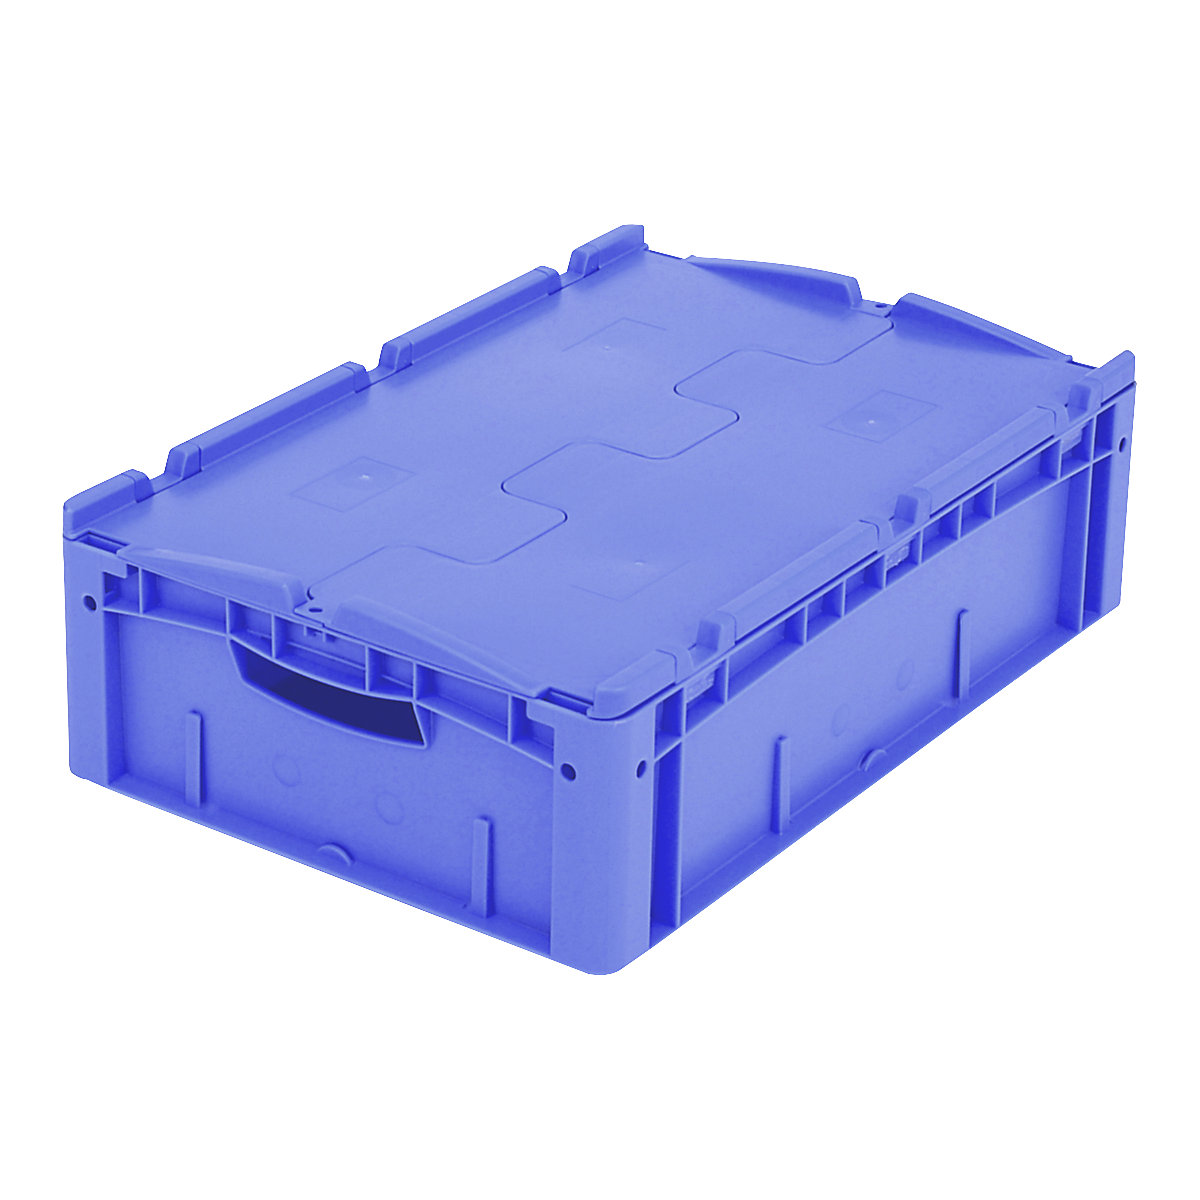 XL Euro stacking container – BITO, with 2-section hinged lid, LxWxH 600 x 400 x 188 mm-3